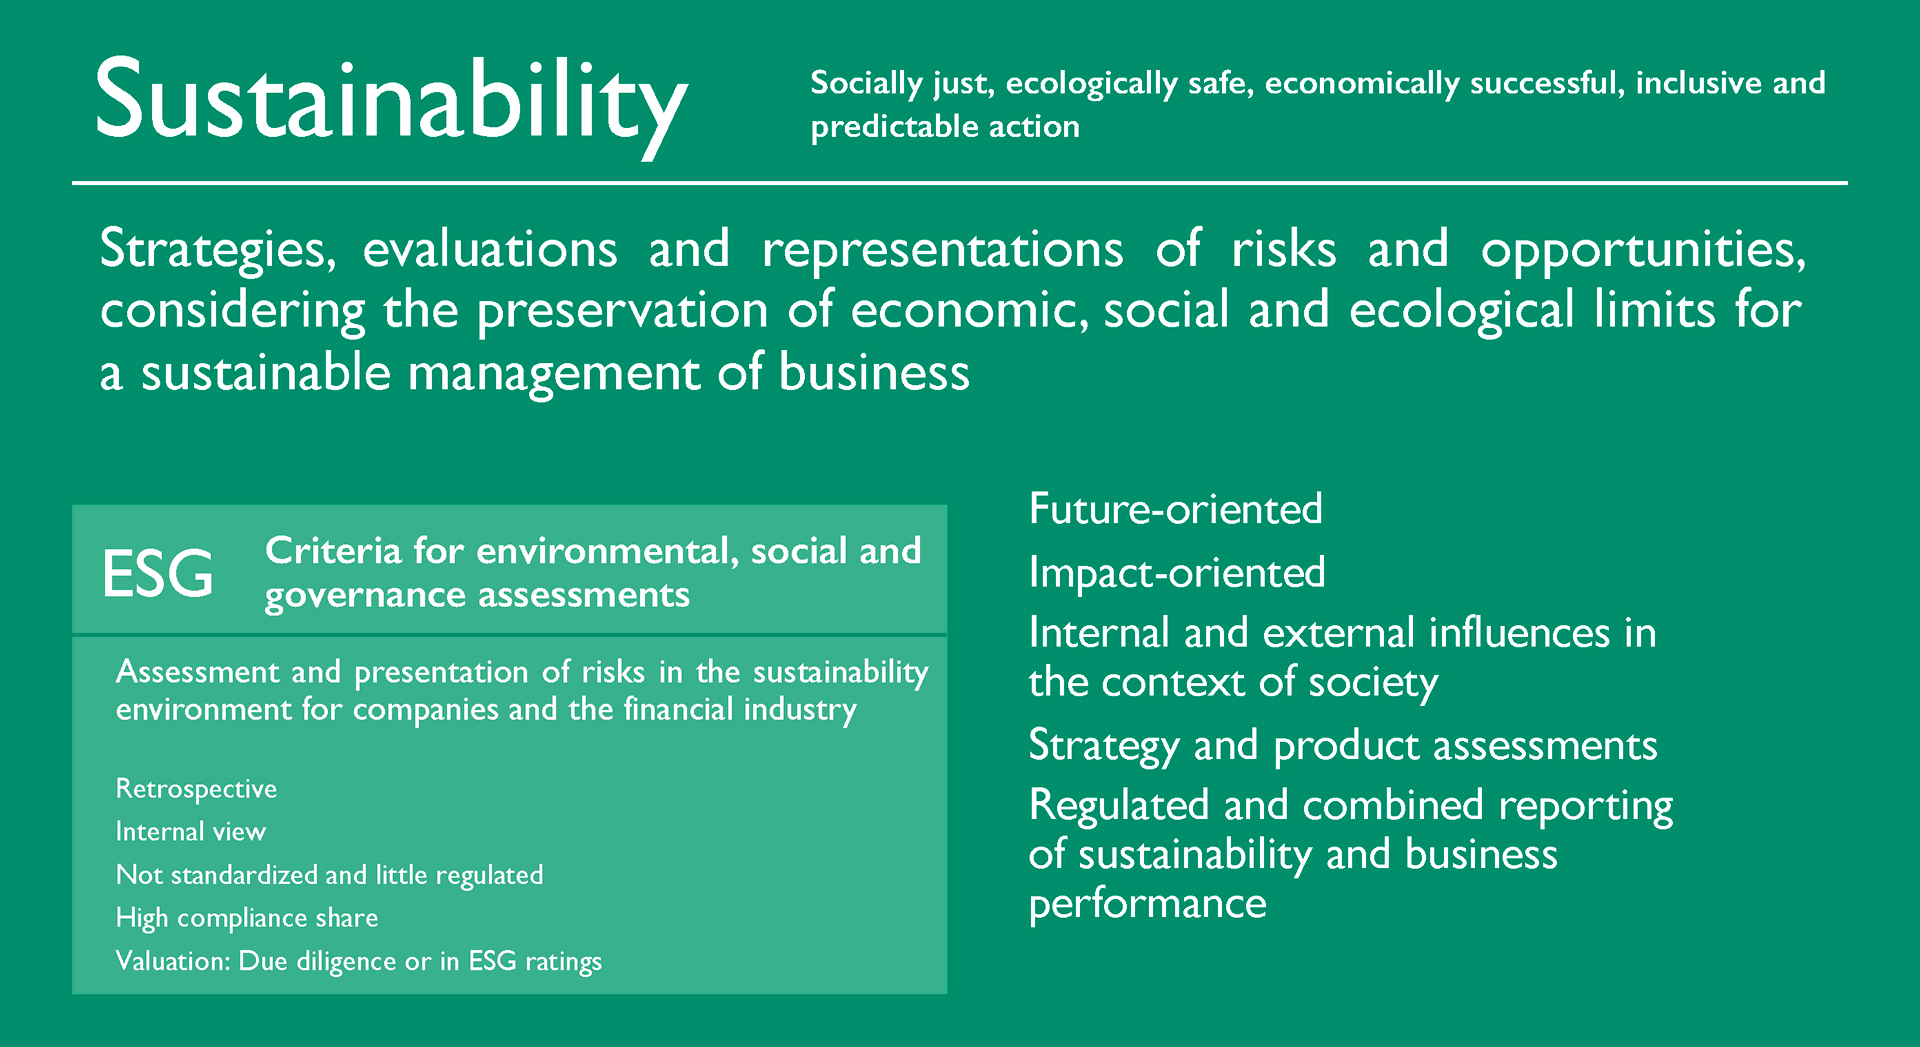 ELCH, Consulting, Services, Sustainability, Graphic 02